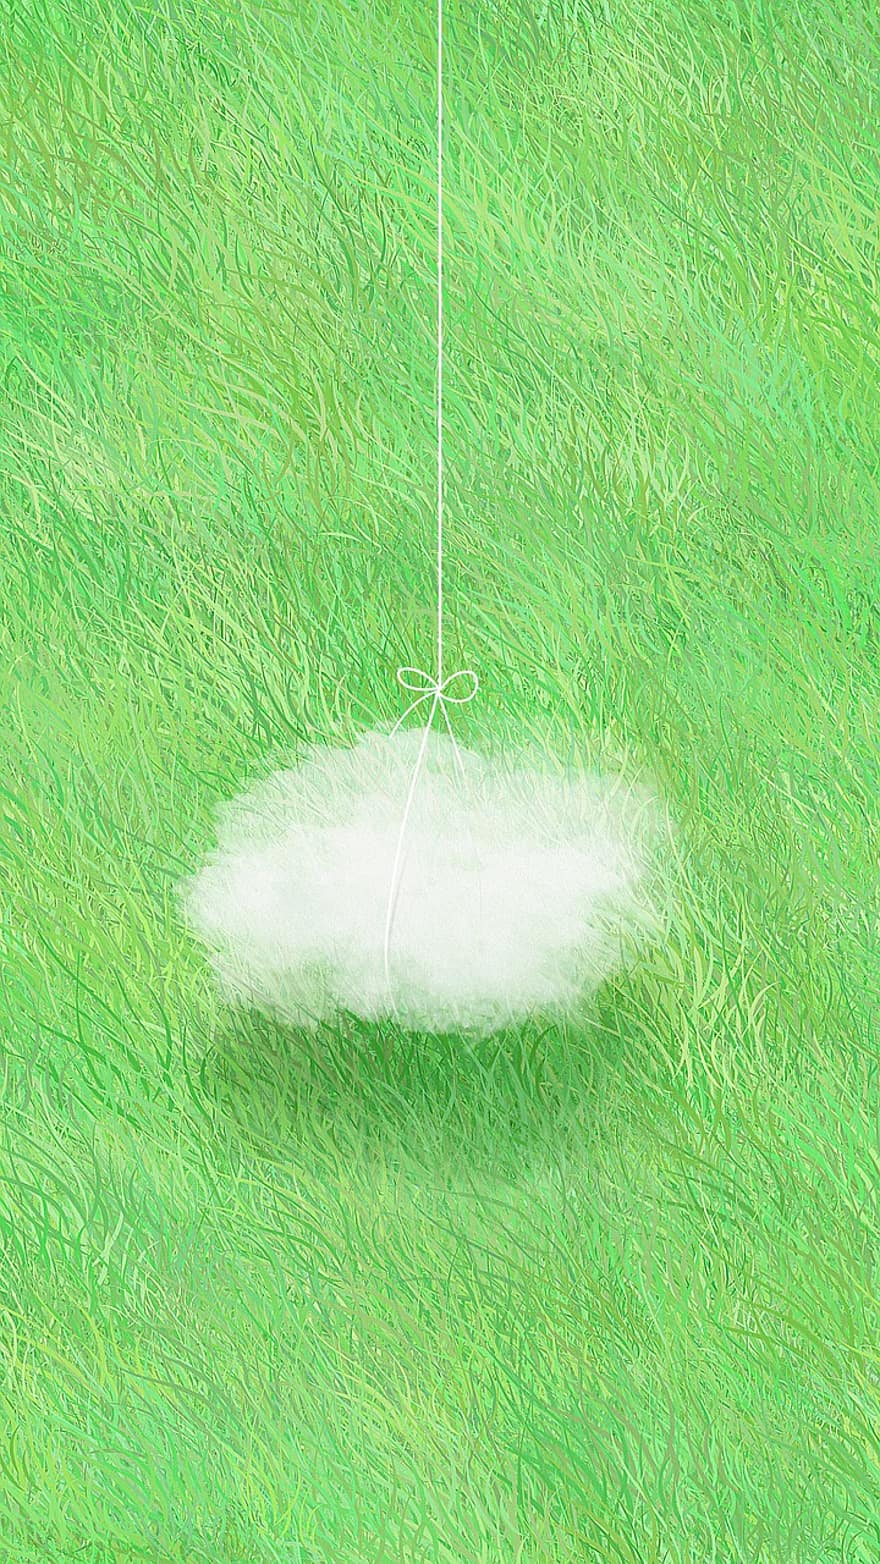 Painting, Creativity, Landscape, Cloud, Grassland, Tree, Ocean, Hanging, Rope, Green Sea, Green Clouds